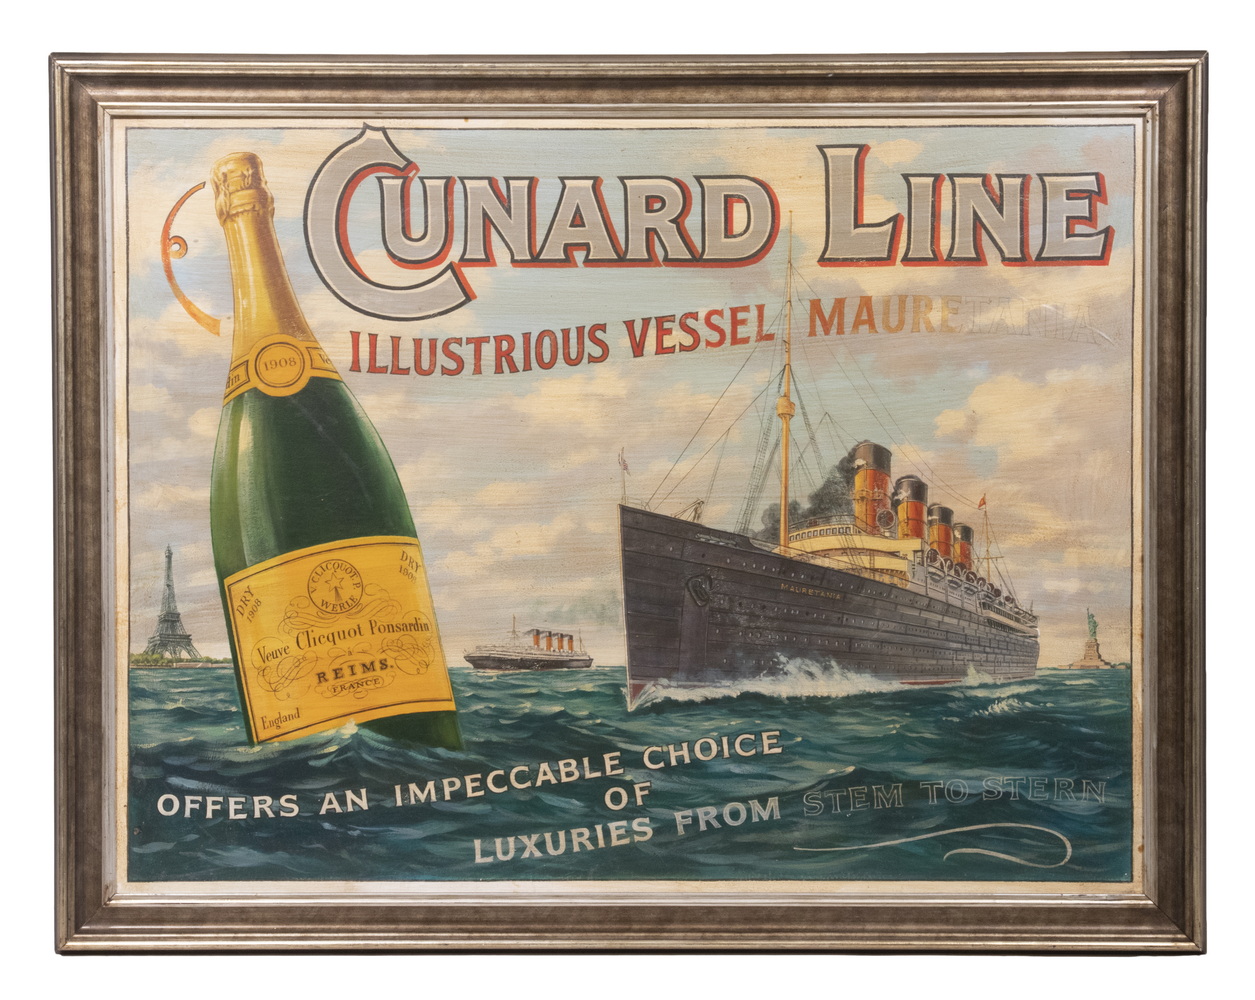 LARGE CHAMPAGNE ADVERTISEMENT WITH OCEAN